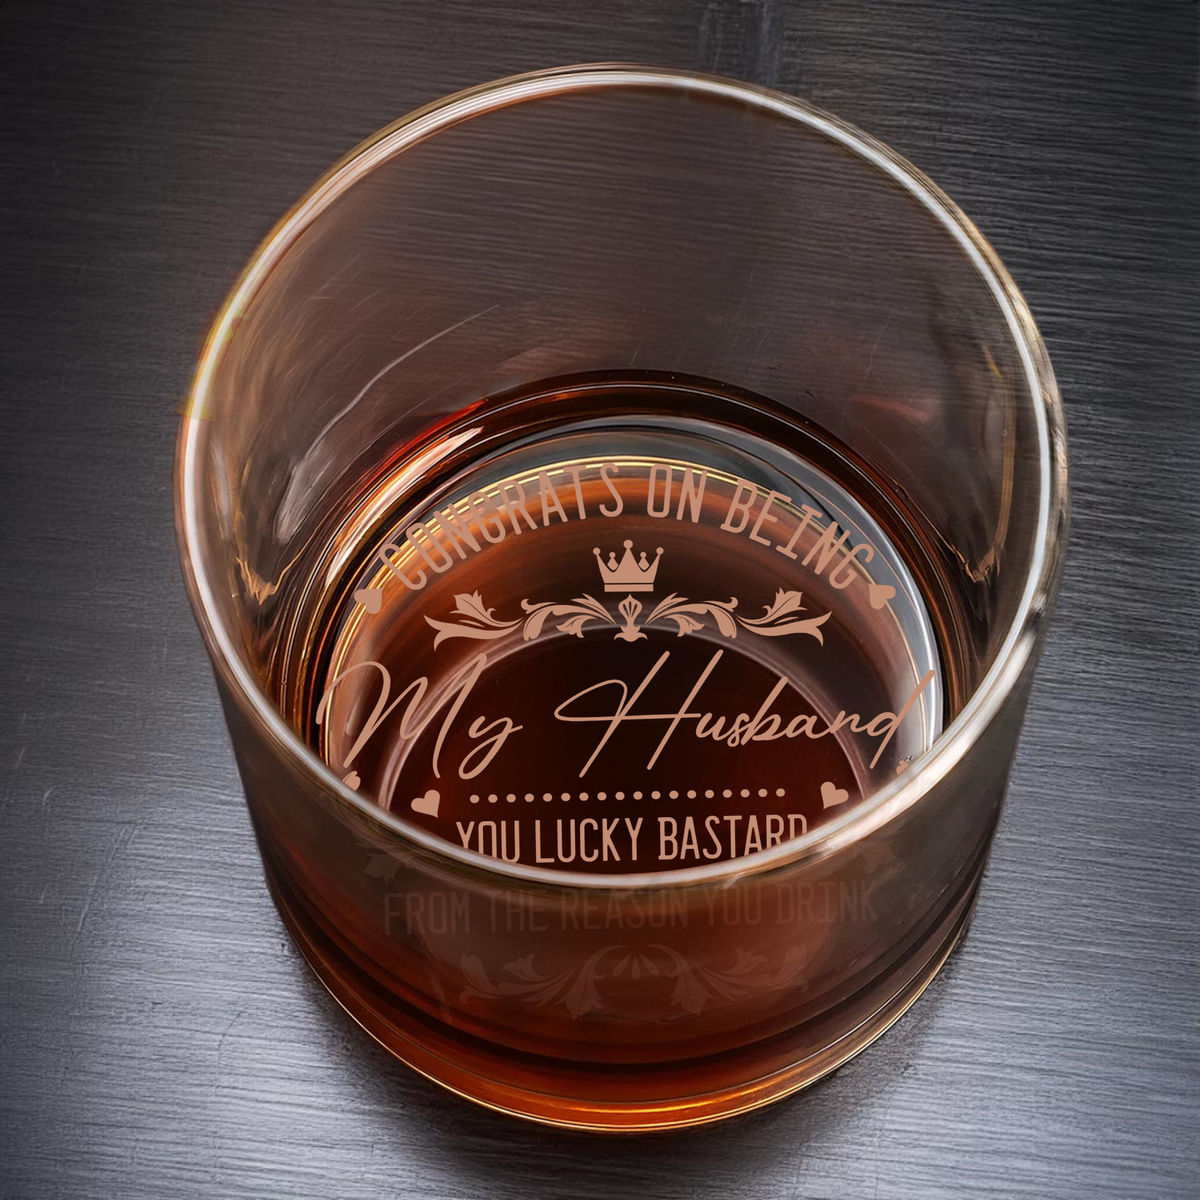 Couple Gifts - Congrats on being my Husband. You lucky bastard from the reason you  Drink. - Gifts For Dad, Husband, Boyfriend... - Gifts For Father's Day, Birthday, Anniversary - Personalize Whiskey Glass_5